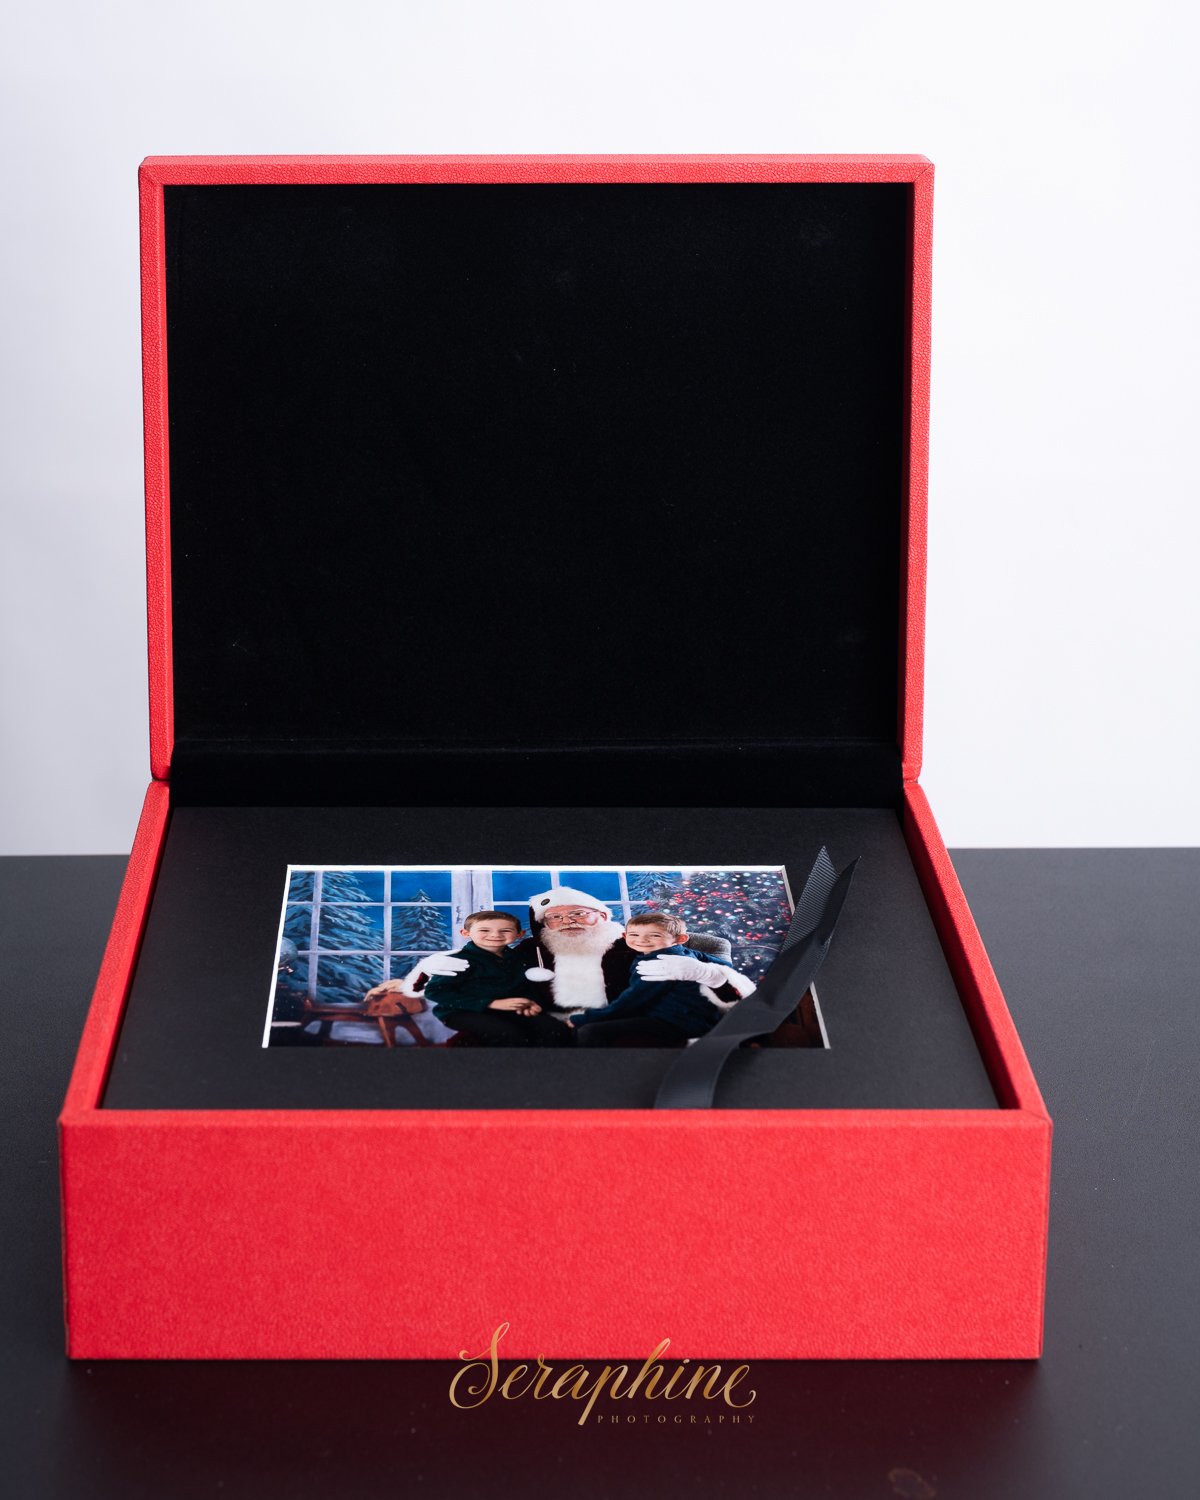 Collection of Portraits in a portrait box a special holiday portrait box-4132.jpg